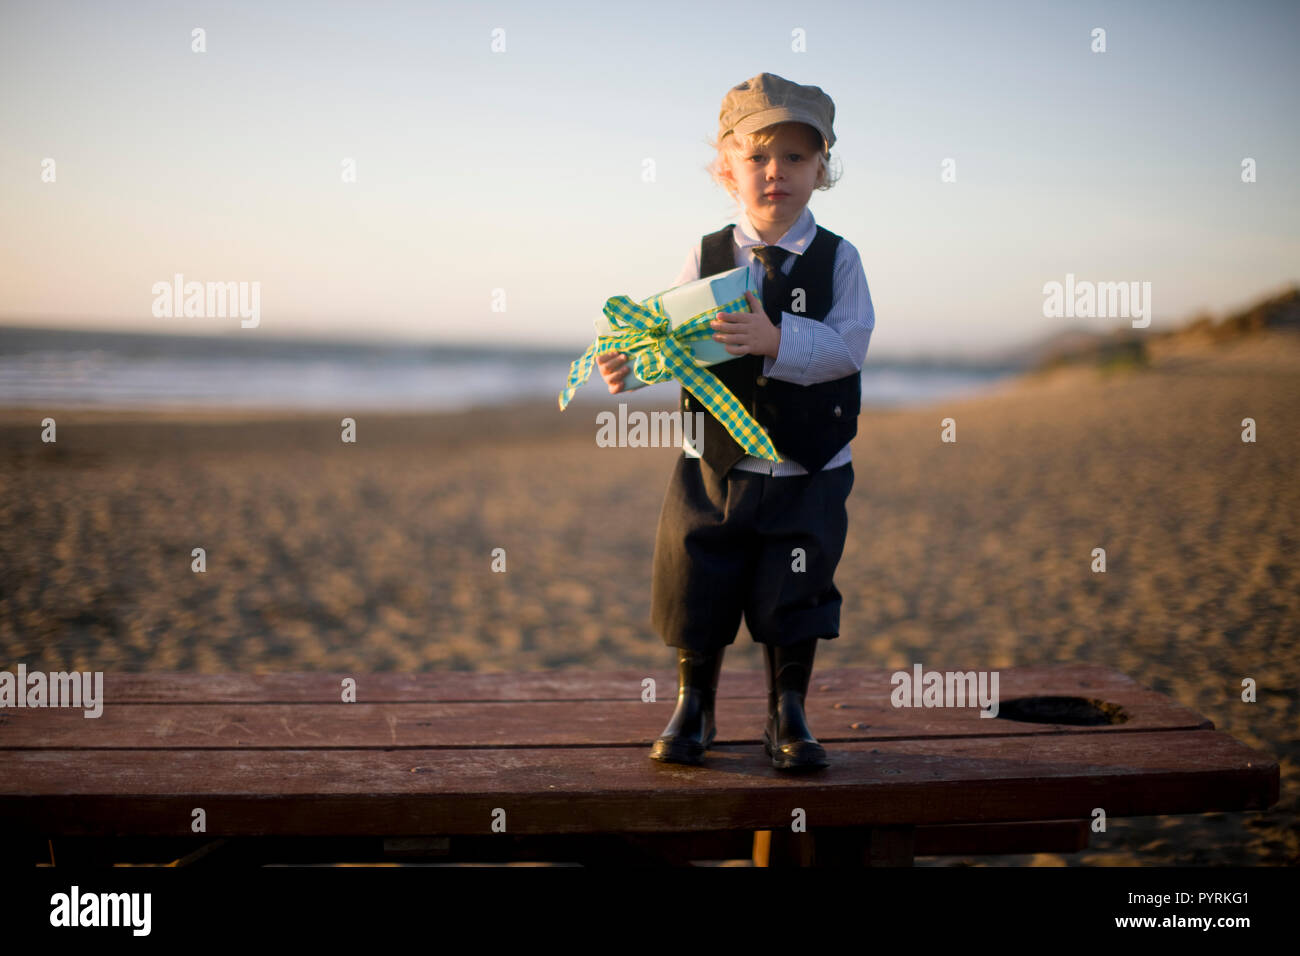 Little boy in old-fashioned clothing carrying books on the beach standing on beach picnic table holding gift Stock Photo